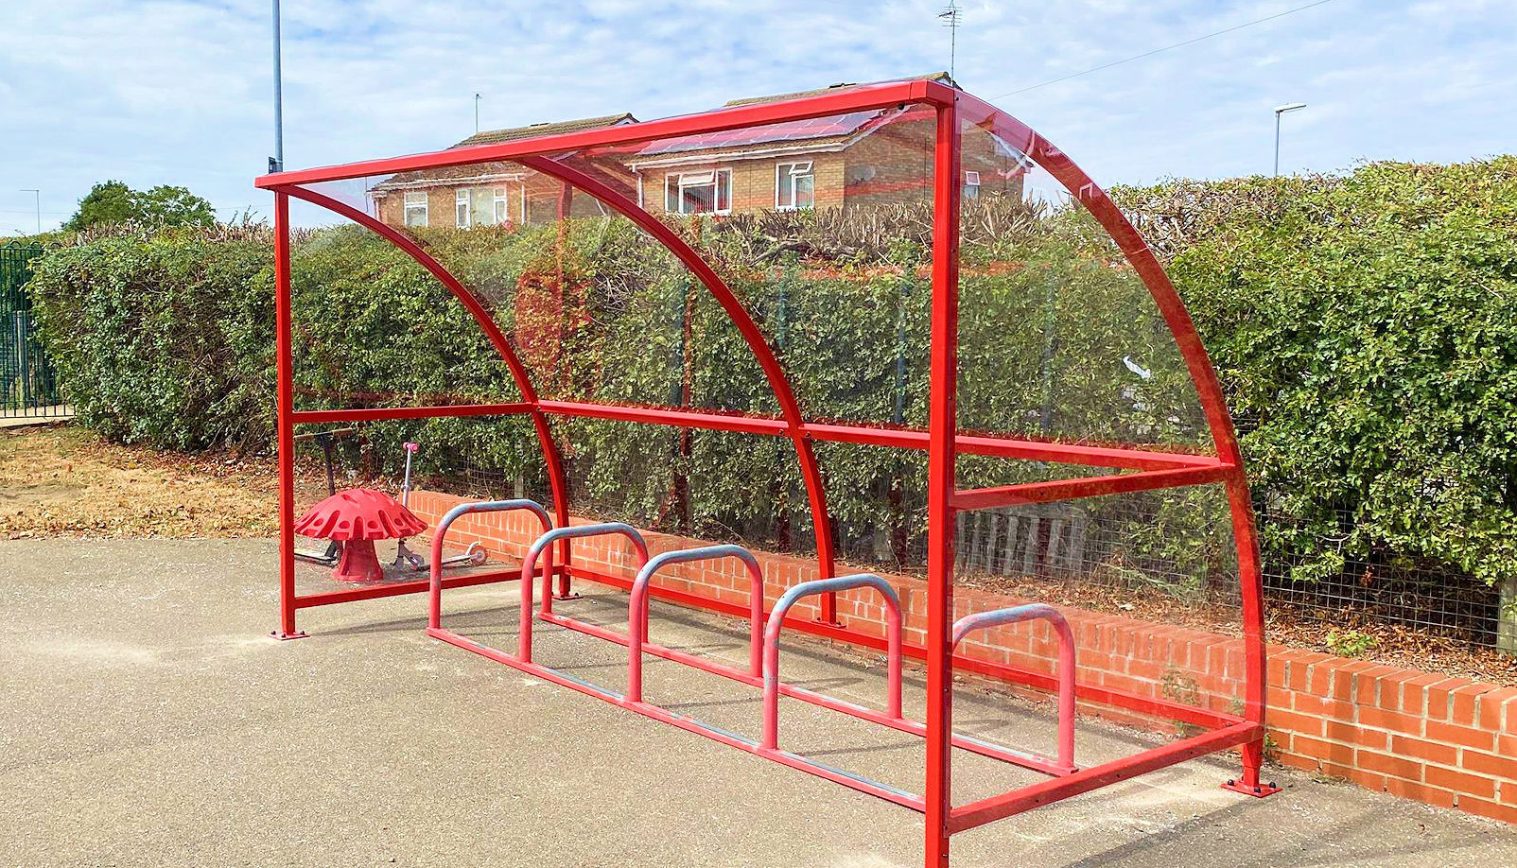 Alderman Jacobs Primary School – Cycle Shelter